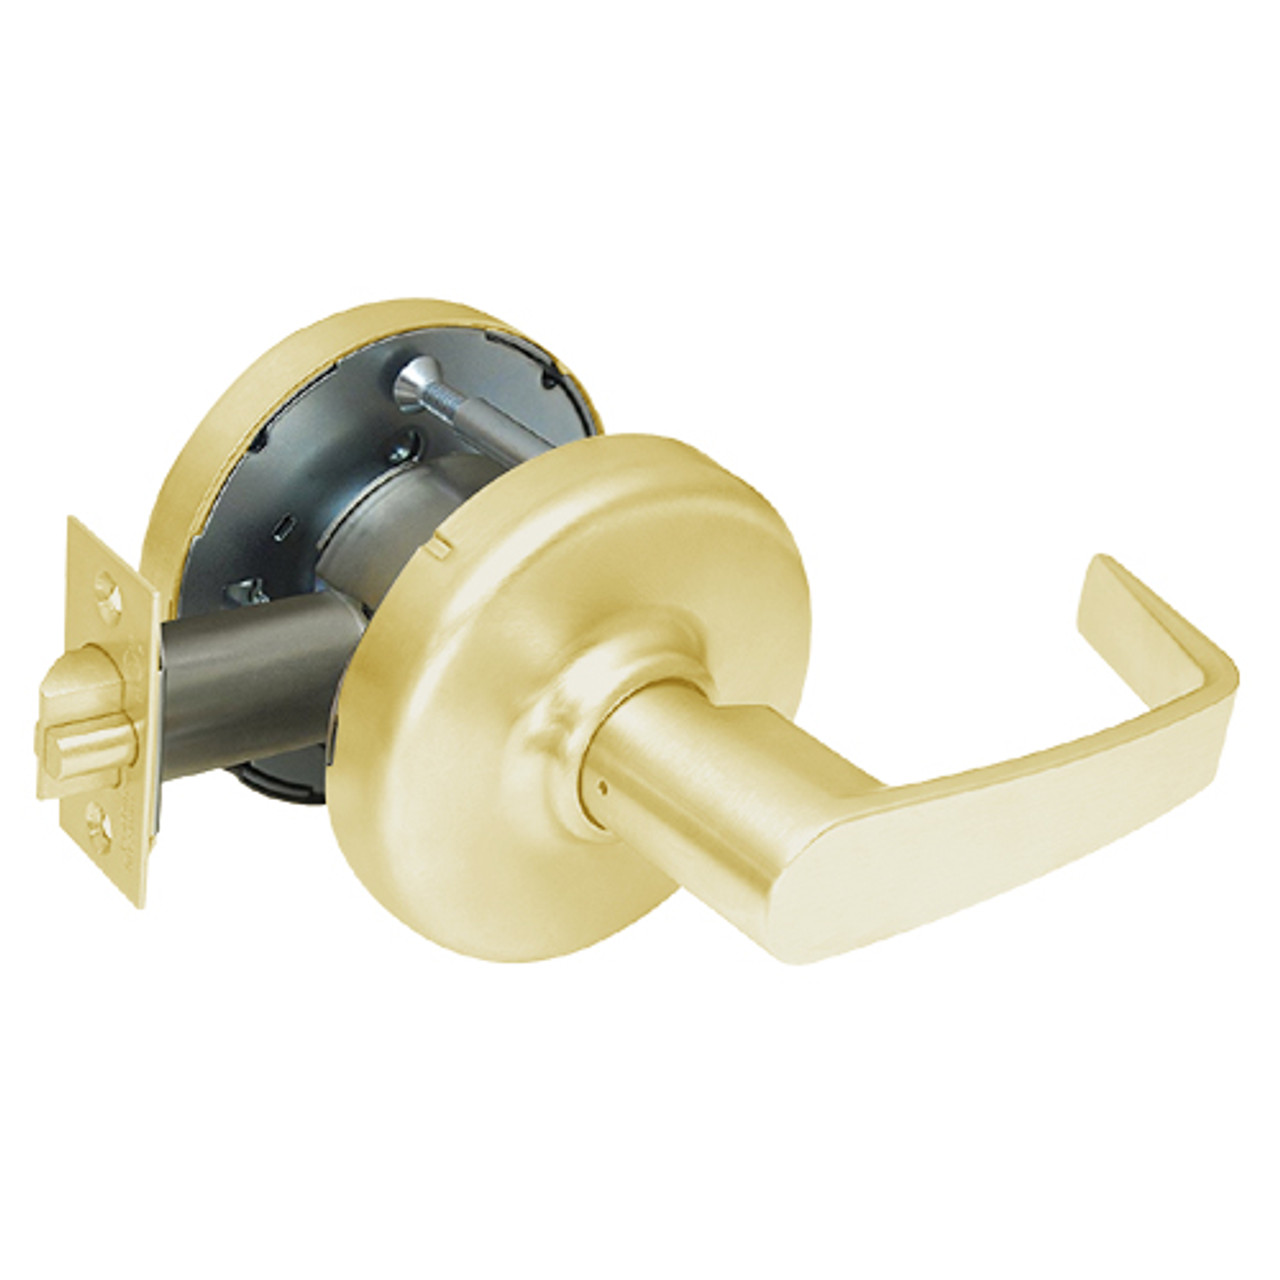 CL3390-NZD-605 Corbin CL3300 Series Extra Heavy Duty Passage with Turnpiece Cylindrical Locksets with Newport Lever in Bright Brass Finish